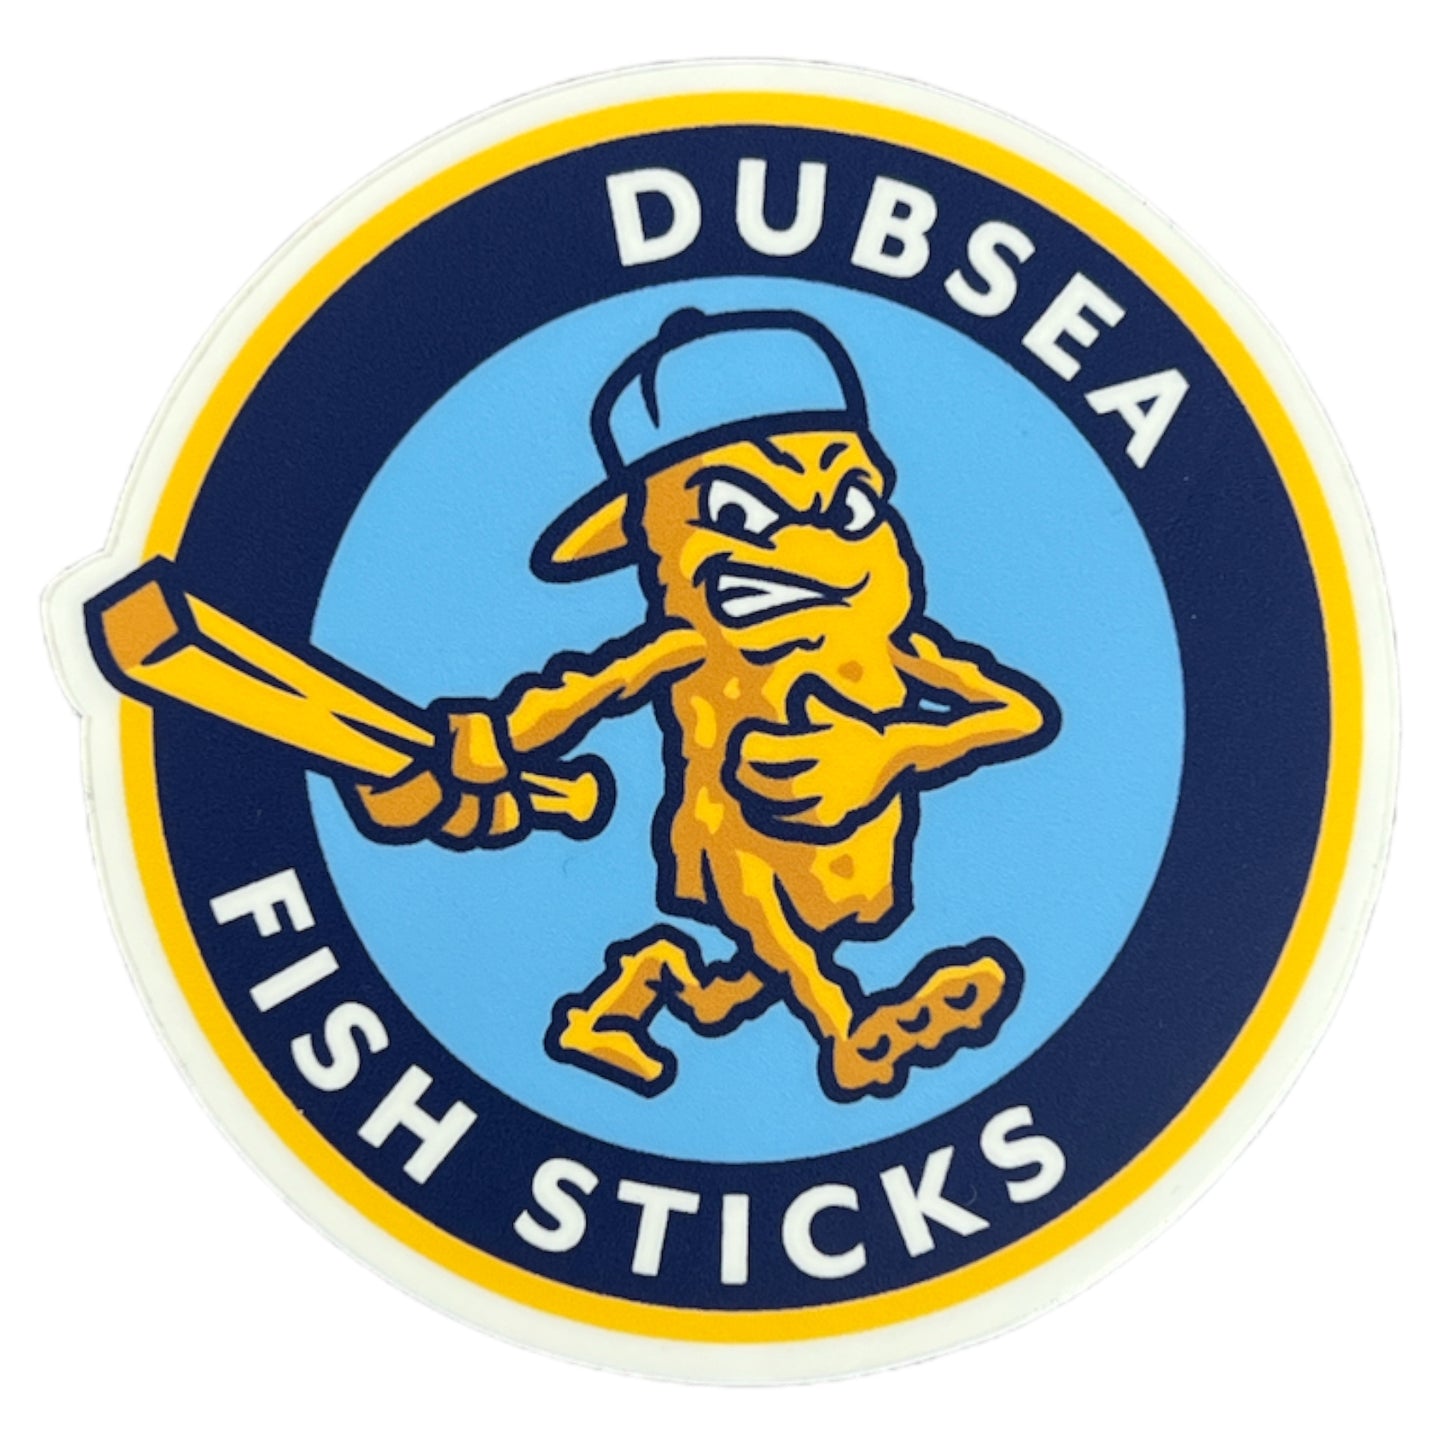 6_Sticker_Pack_Crispy_Frozen_Ice_Cube_Circle_Holographic_The_Fryer_Dubsea_Fish_Sticks_Word_Stickers